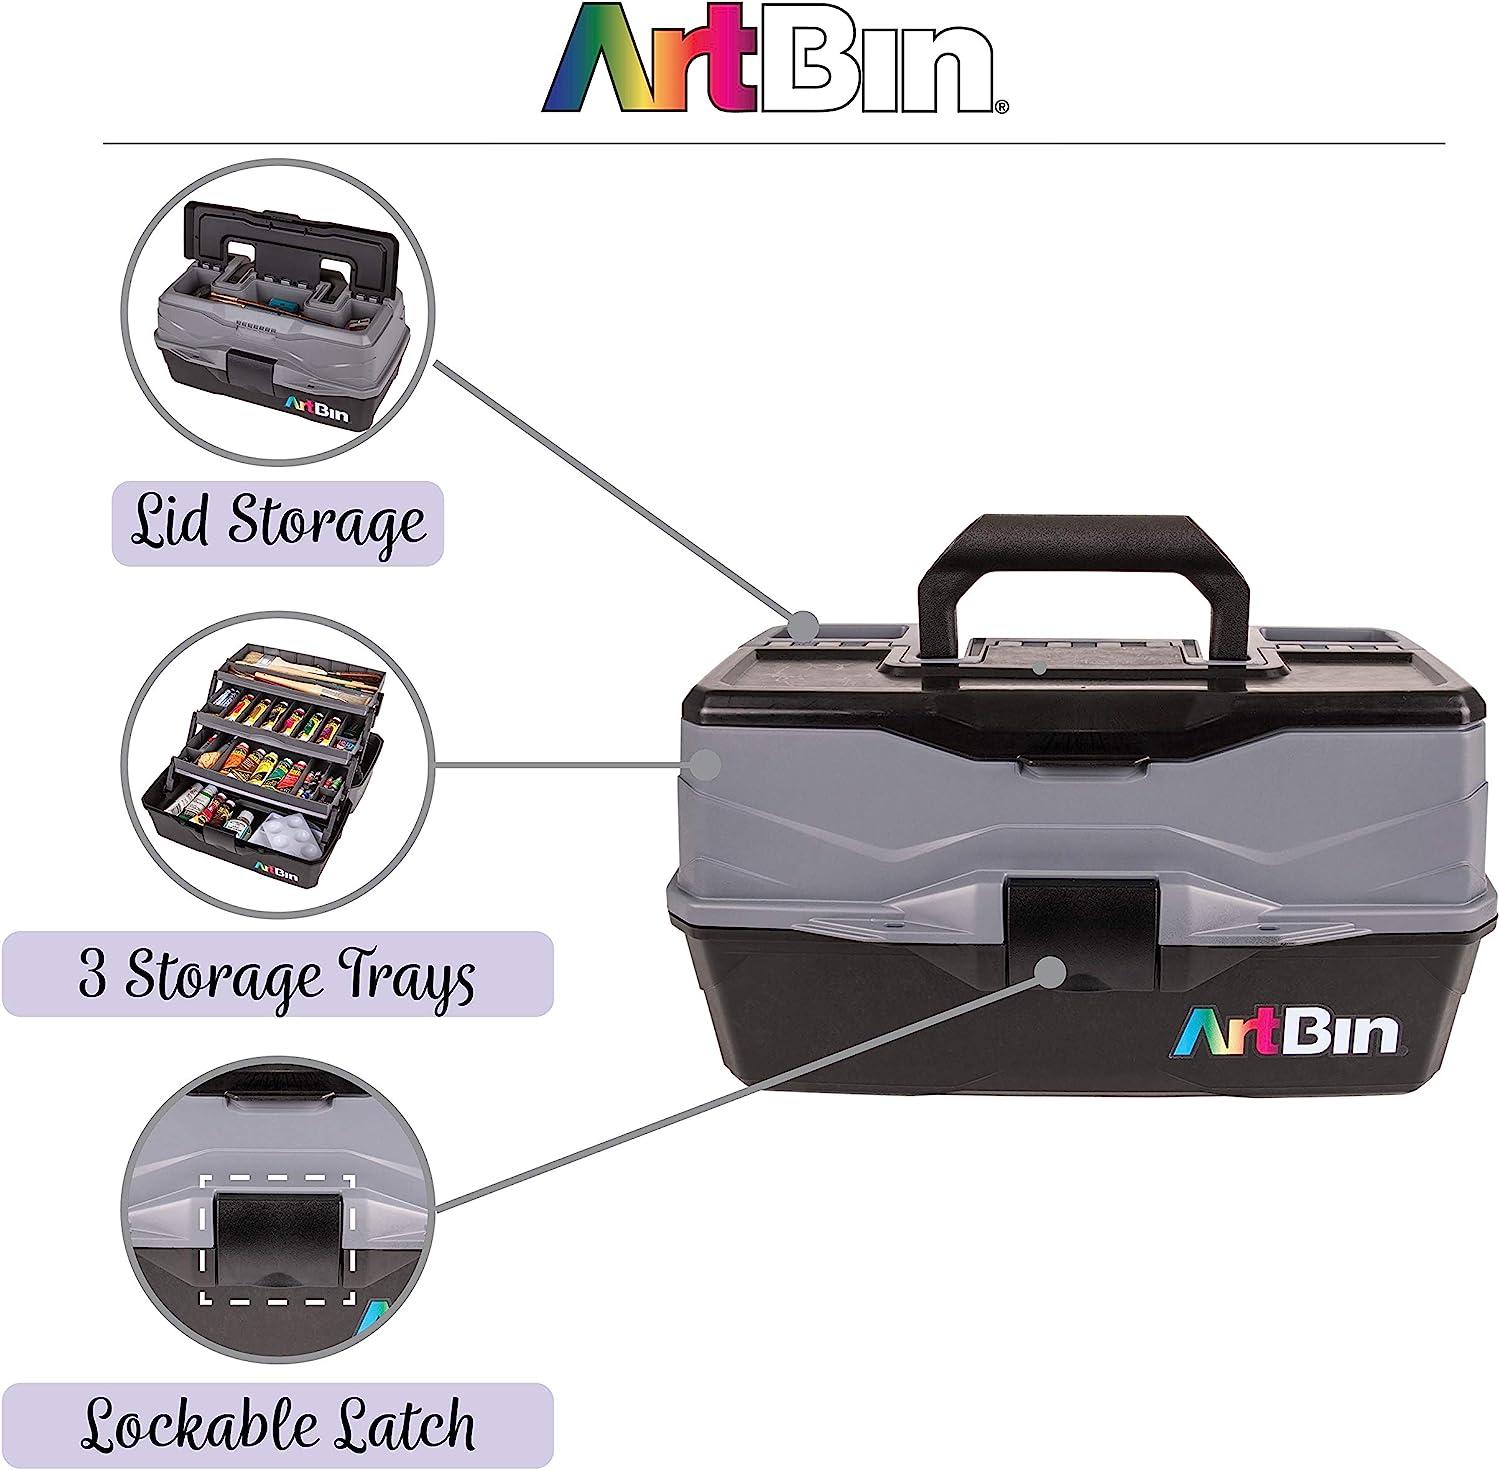 ArtBin Lift Box With 1 Tray And Quick Access Lid Storage